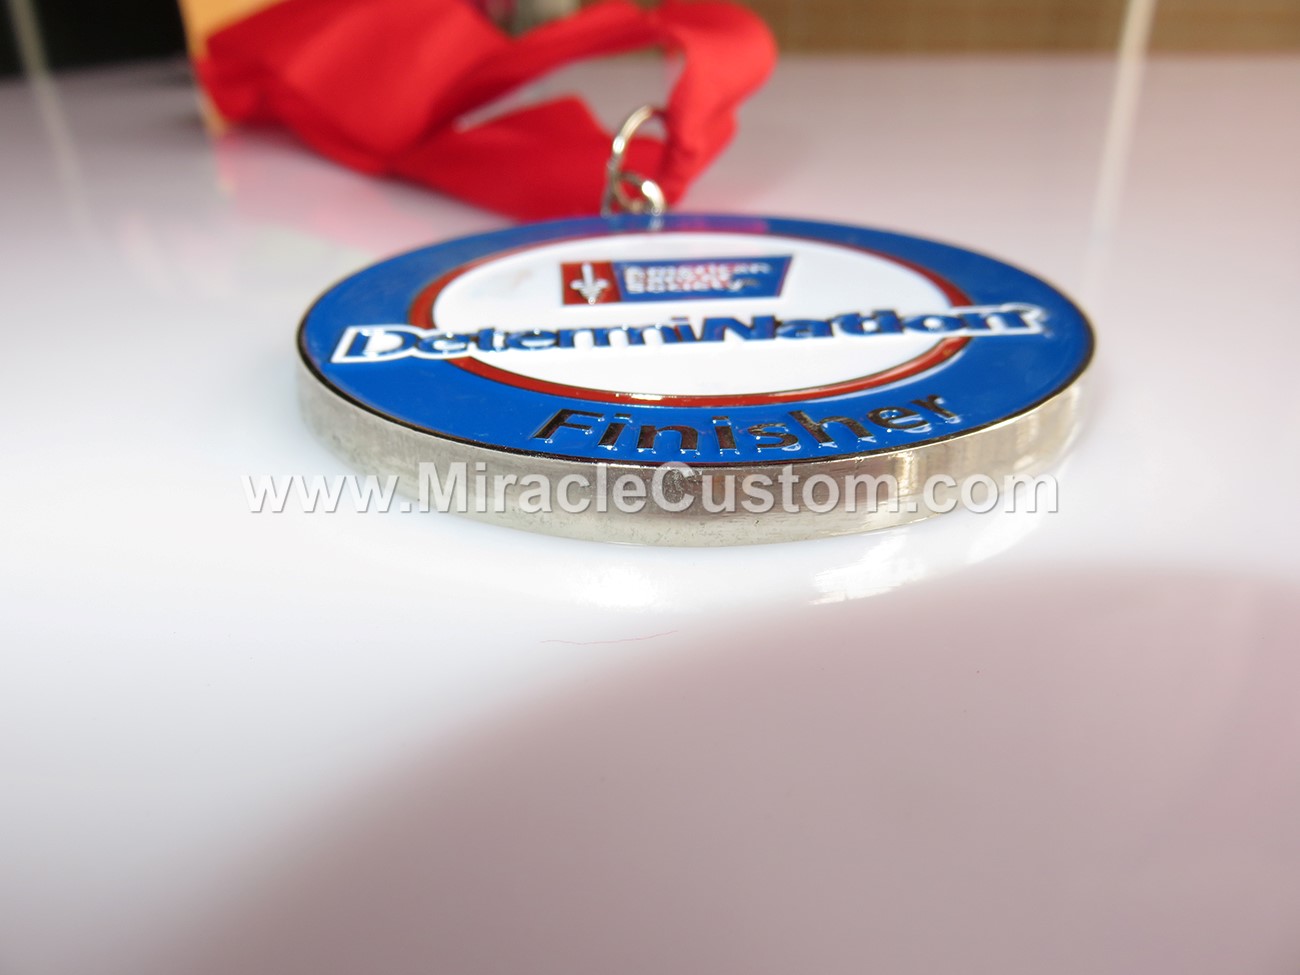 custom finisher medals and medallions